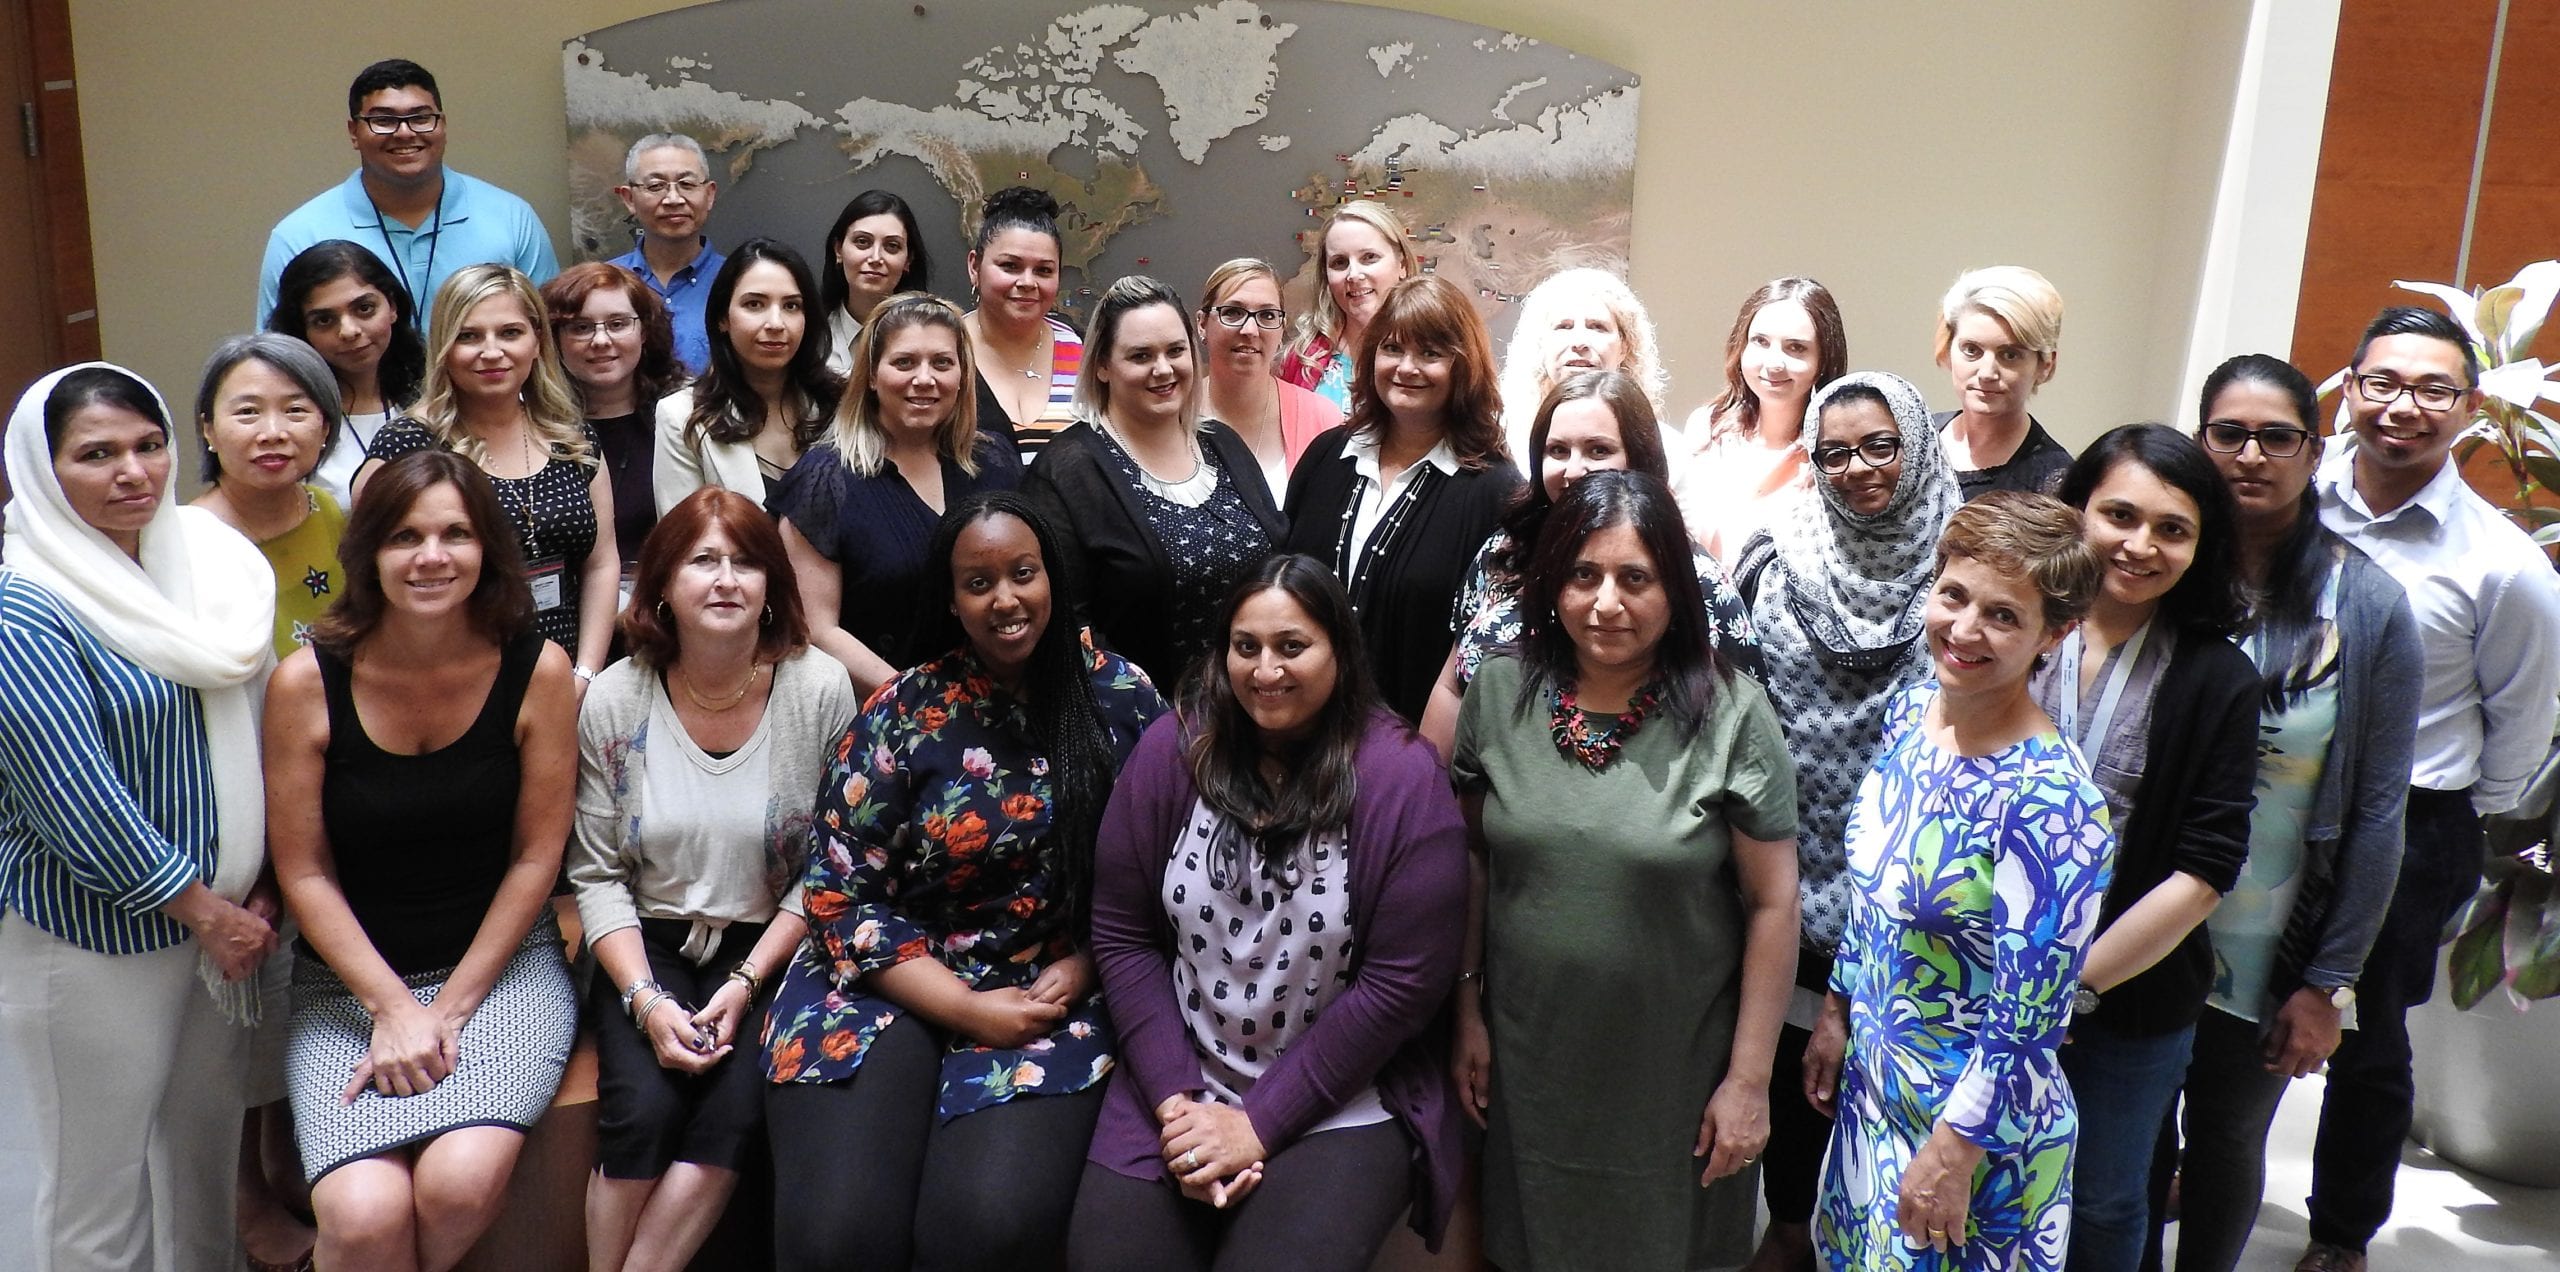 Sumathy (front row) with her Global Health research team.